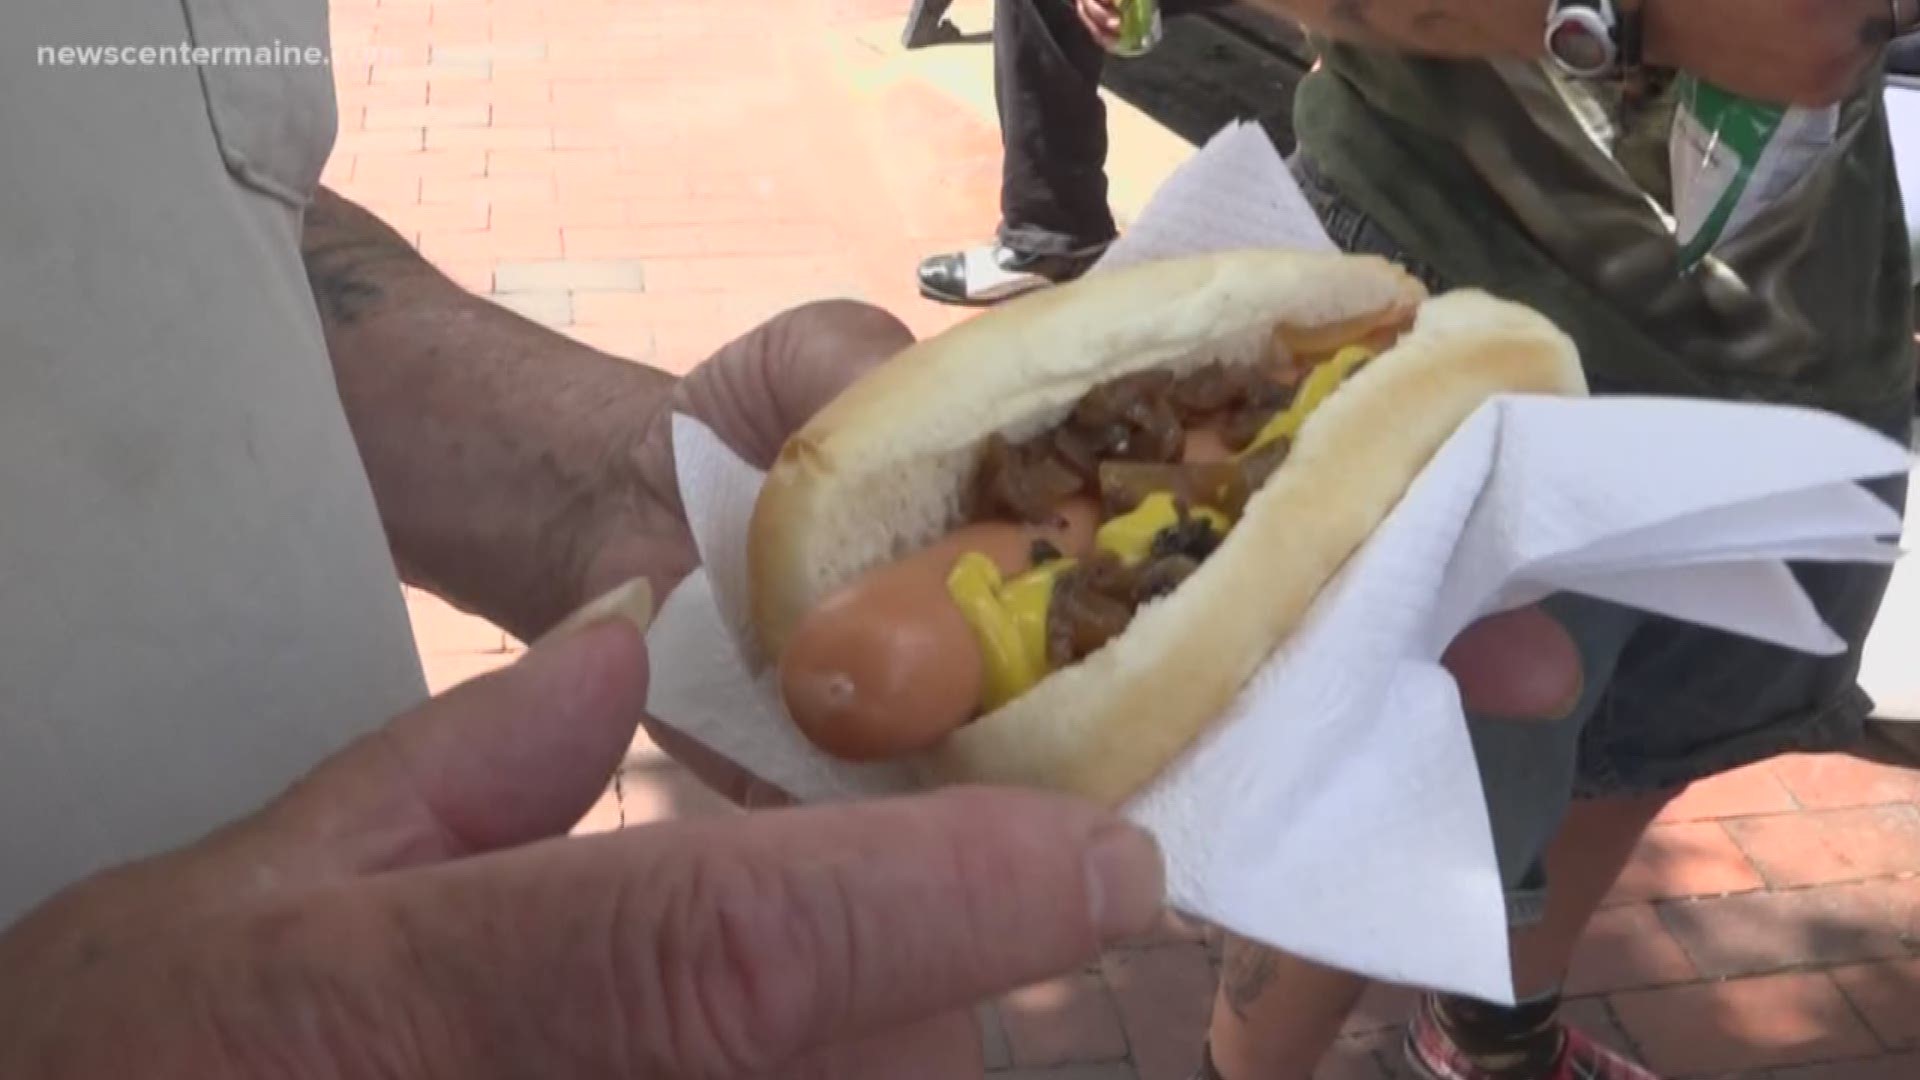 NOW: What is acceptable on a hot dog?